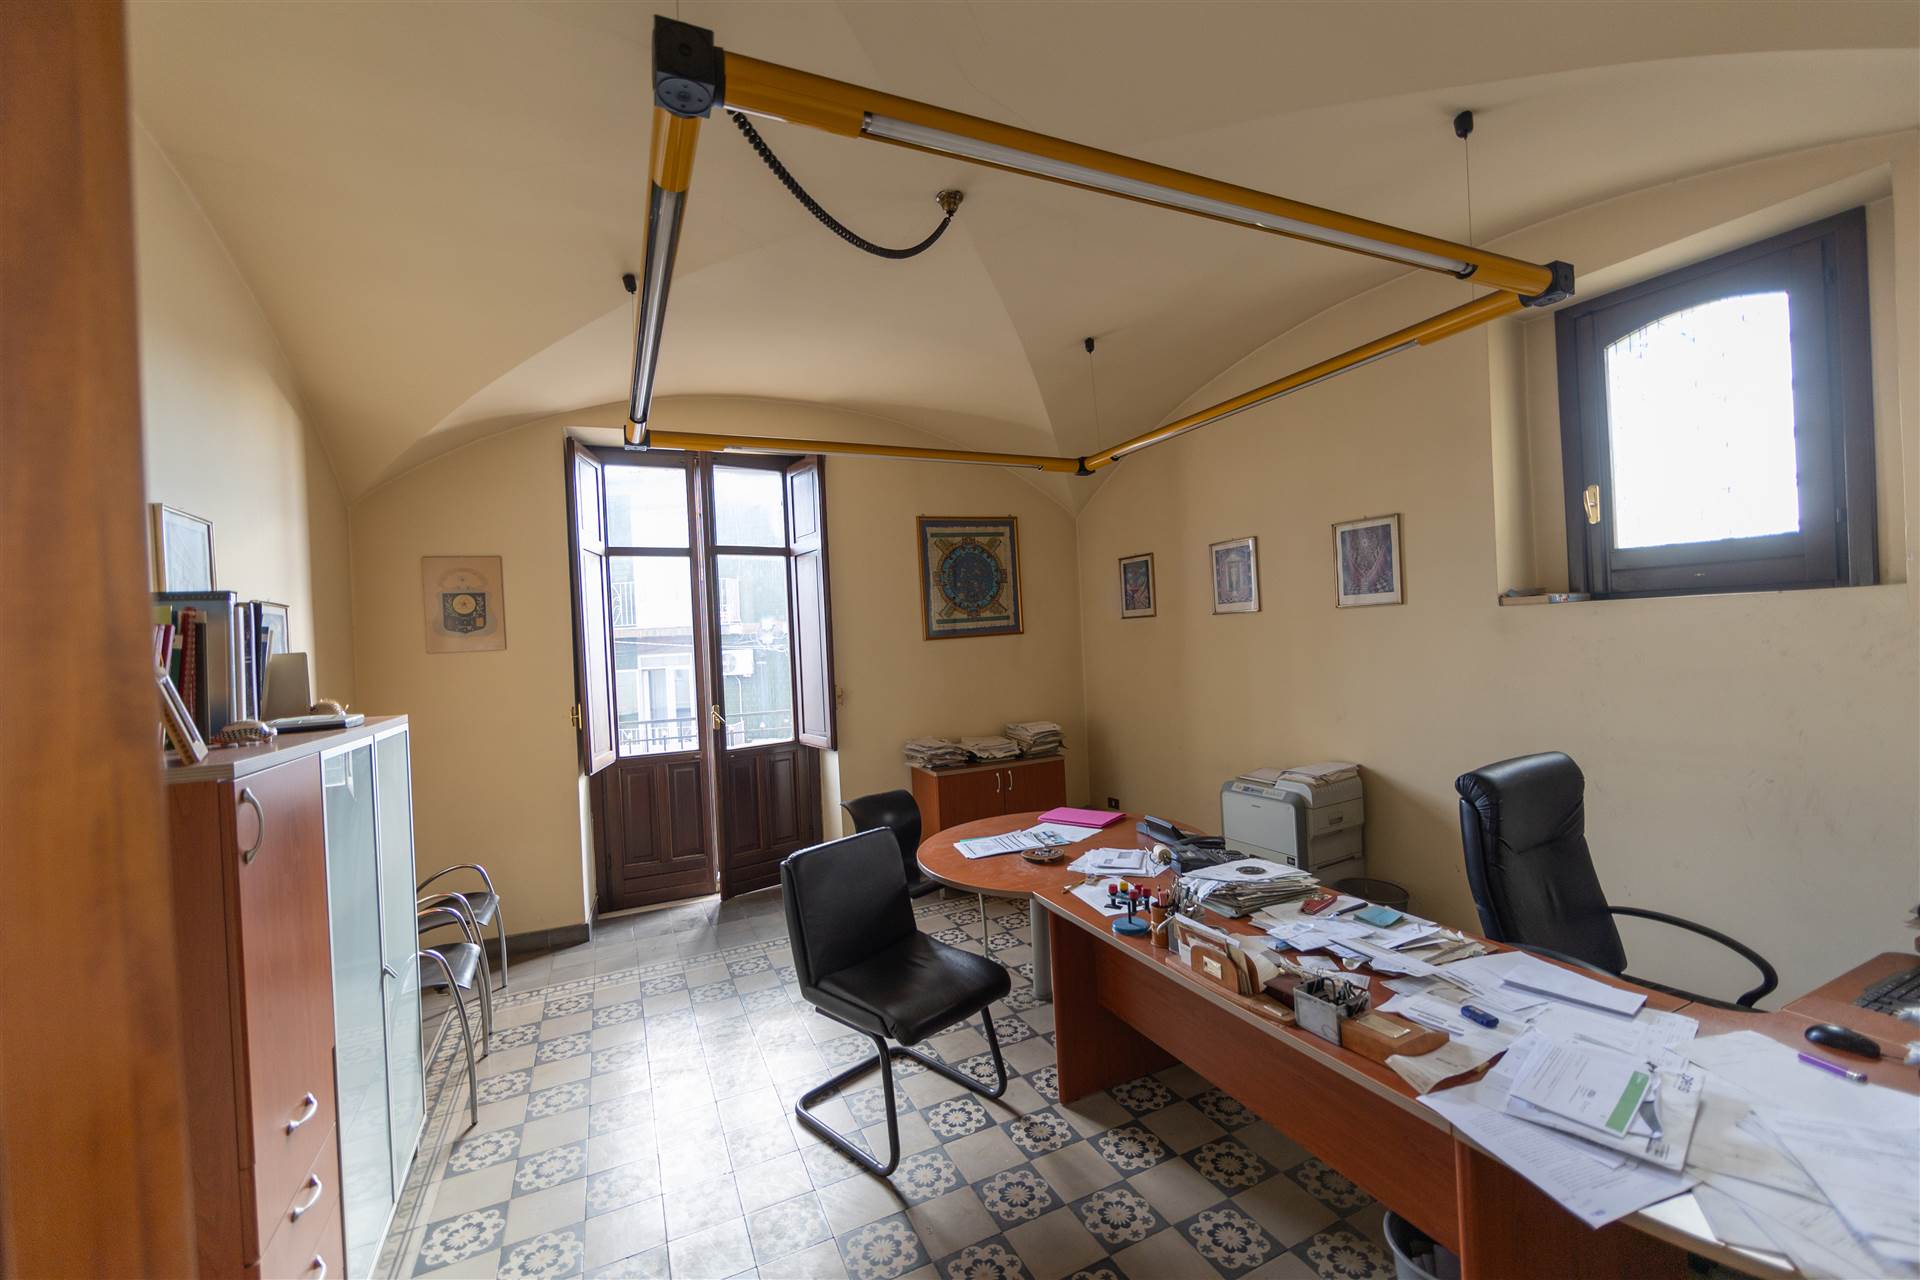 SAN GREGORIO DI CATANIA, Apartment for sale of 101 Sq. mt., Good condition, Heating Individual heating system, placed at 2°, composed by: 4 Rooms, 